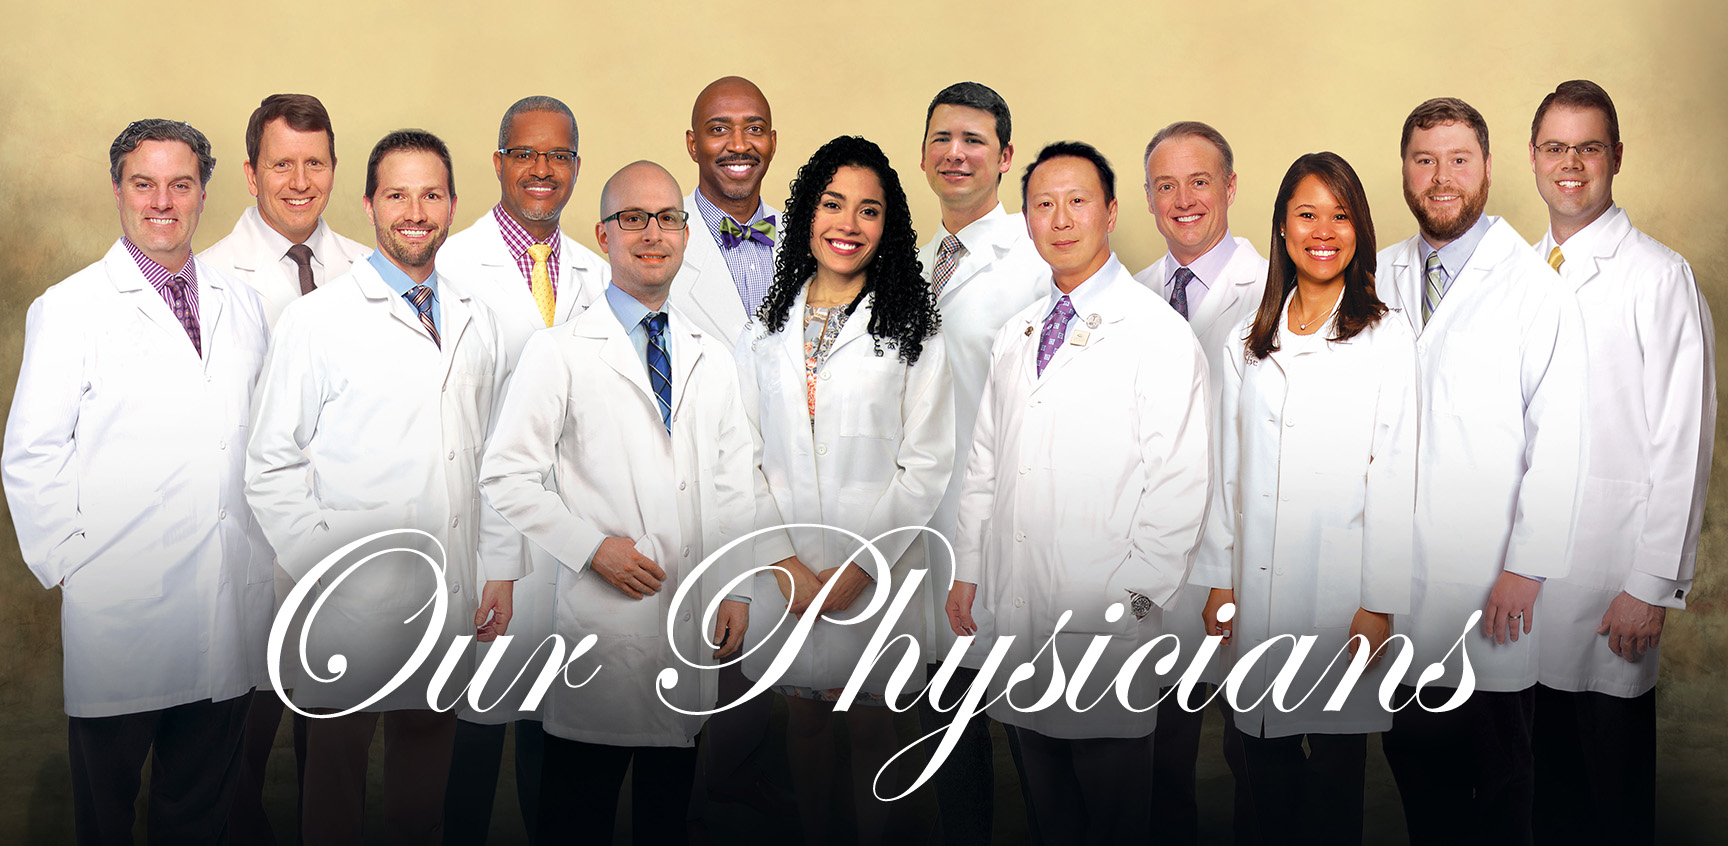 The Physicians of Graystone Eye